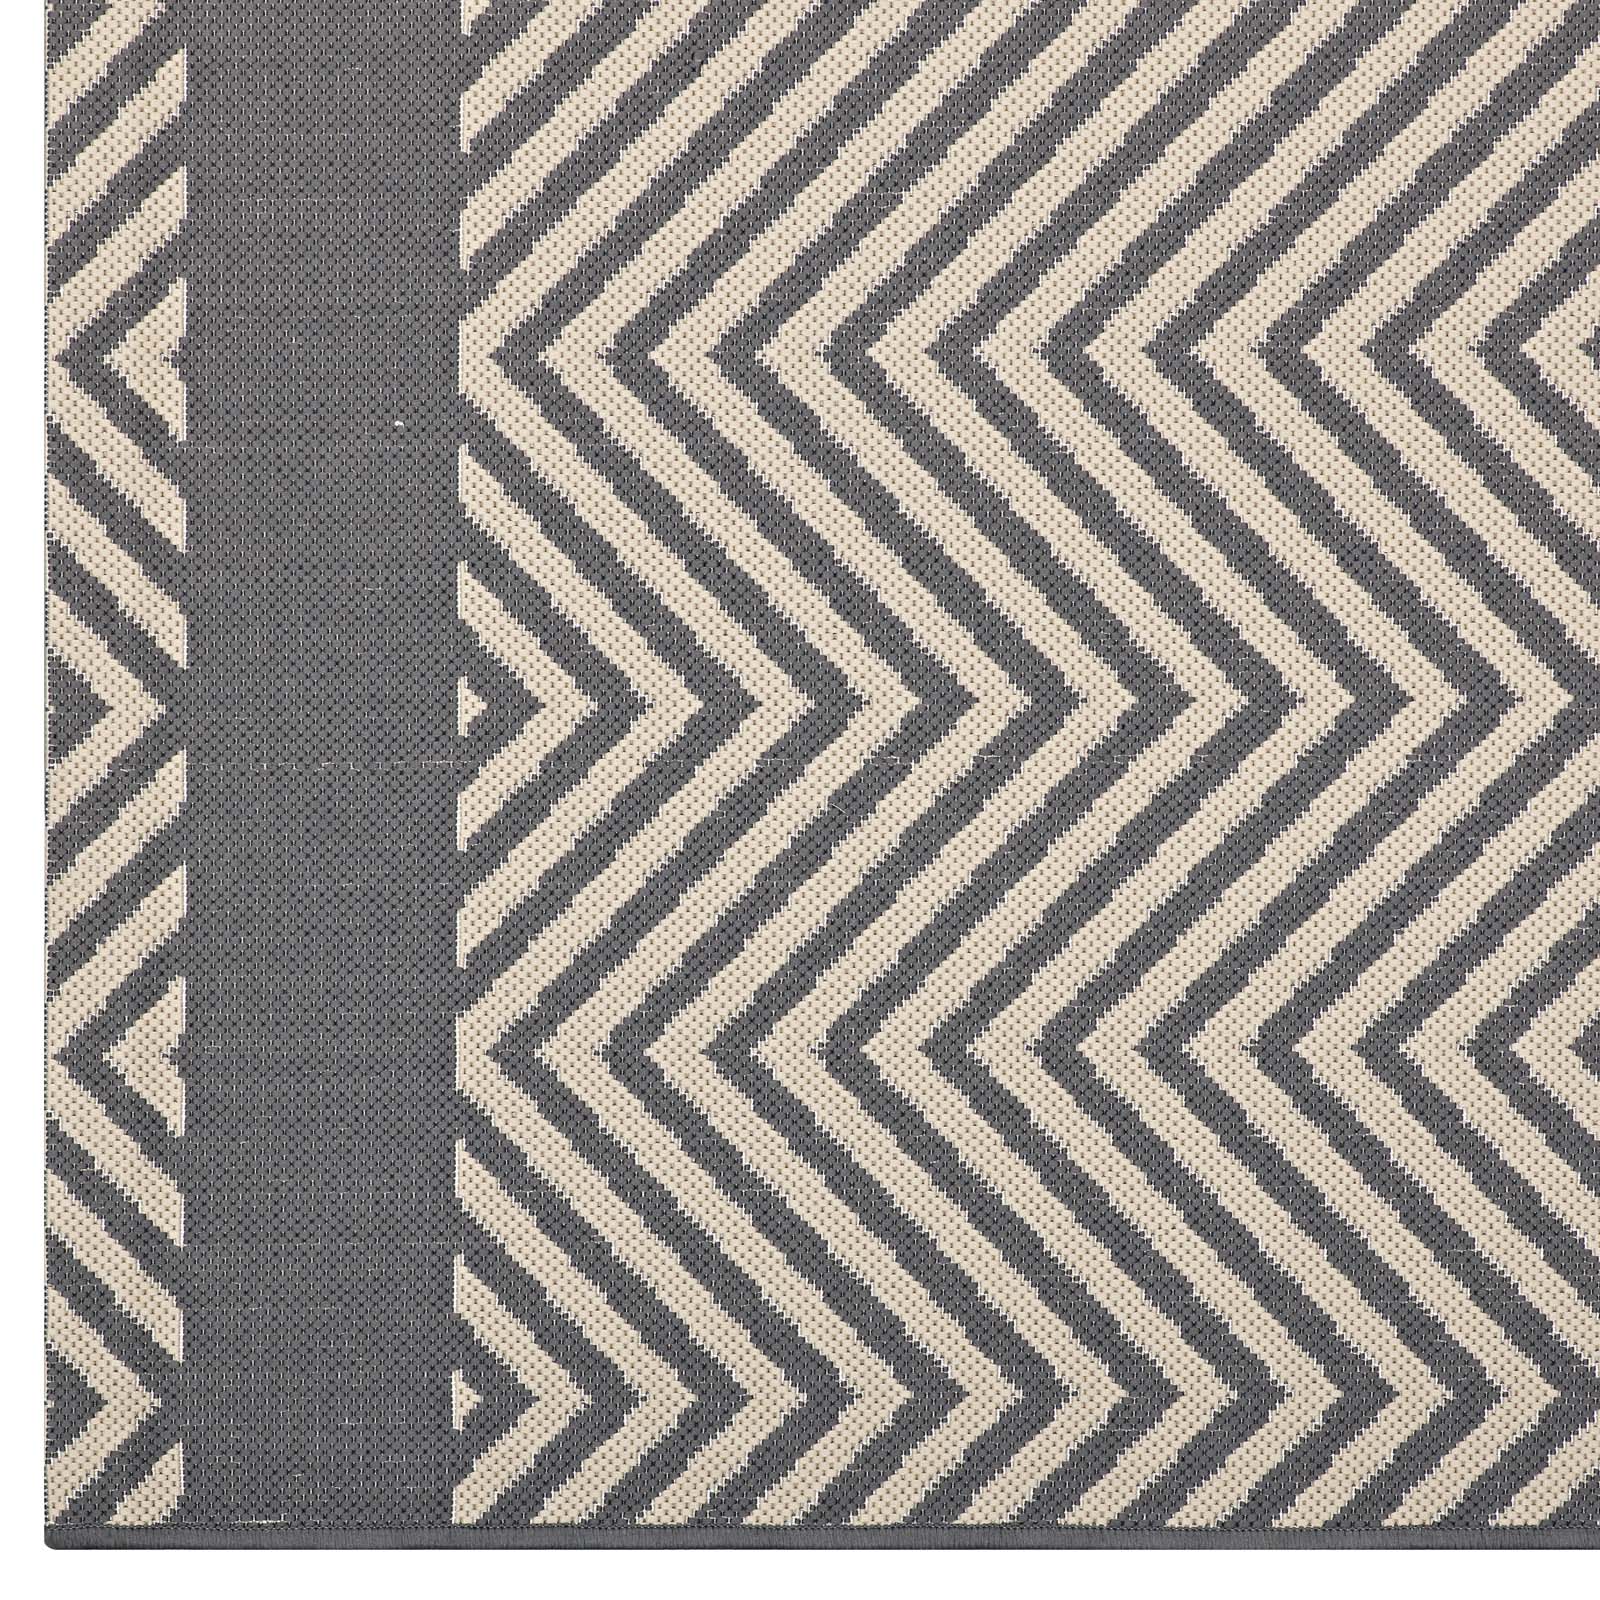 Modway Outdoor Rugs - Optica Chevron With End Borders 5x8 Indoor and Outdoor Area Rug Gray & Beige